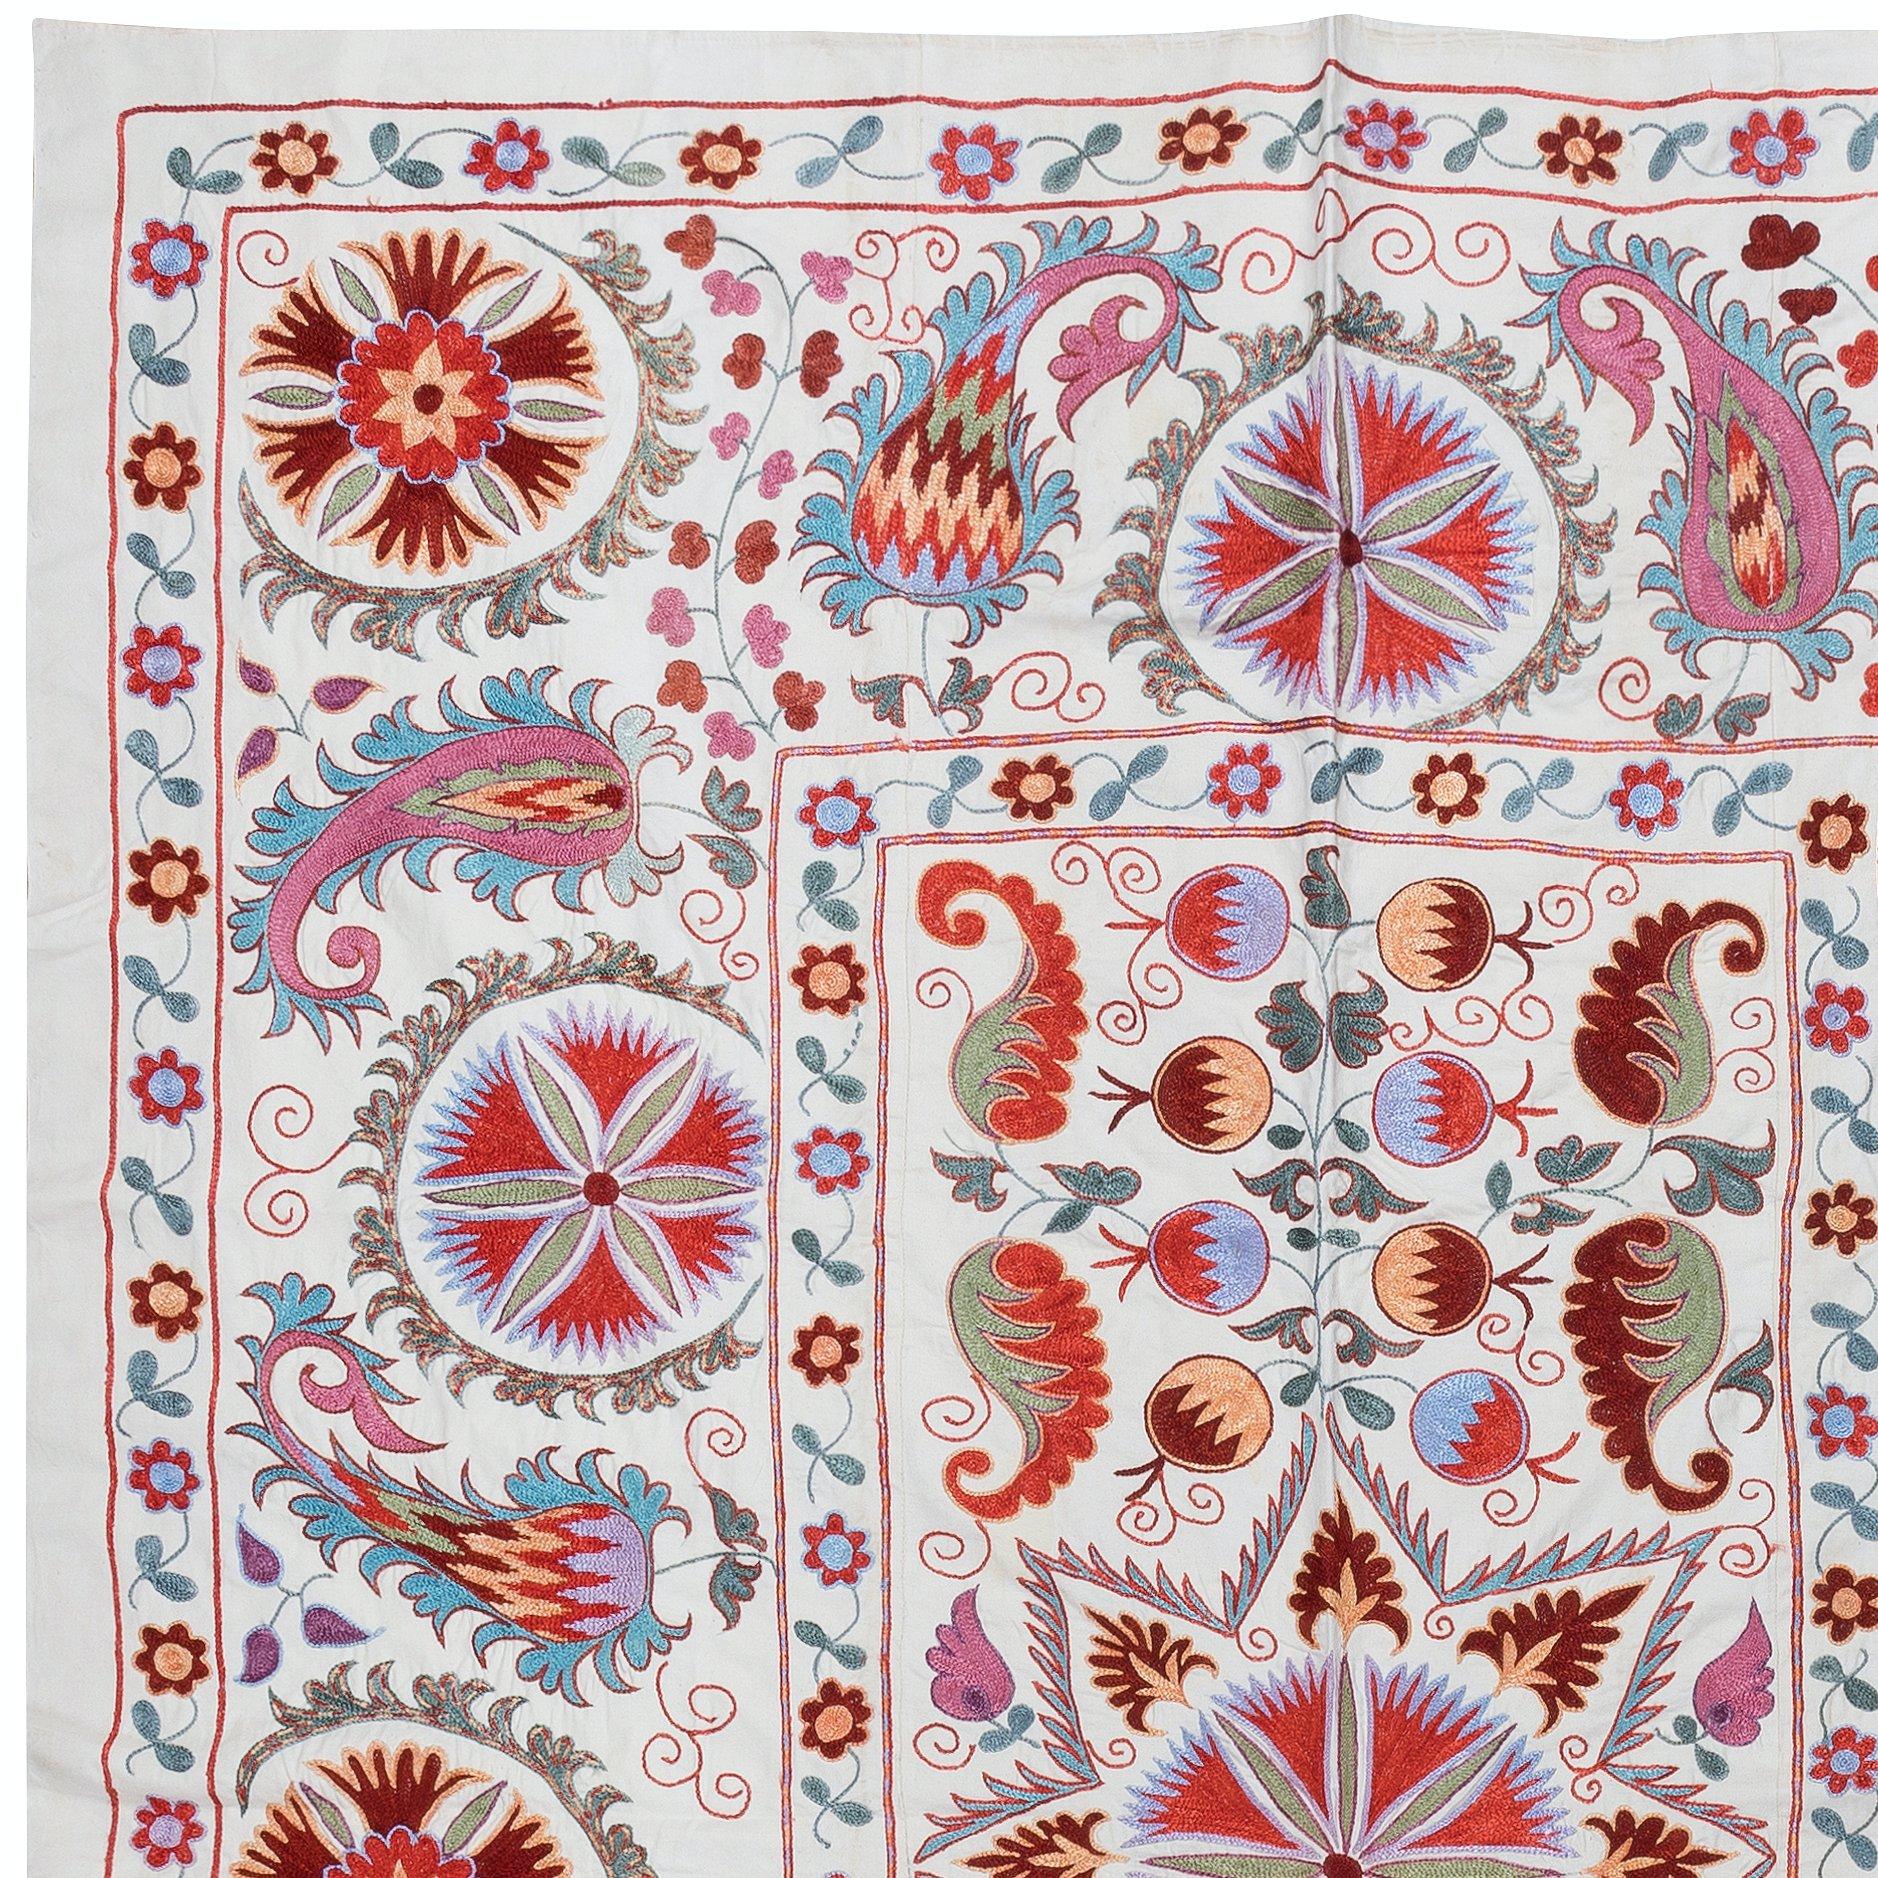 Introducing our exquisite new suzani hand embroidered wall hanging, a captivating piece that combines ancient craftsmanship with modern artistry. This embroidered cloth is not just a suzani throw, but a remarkable suzani wall hanging that will